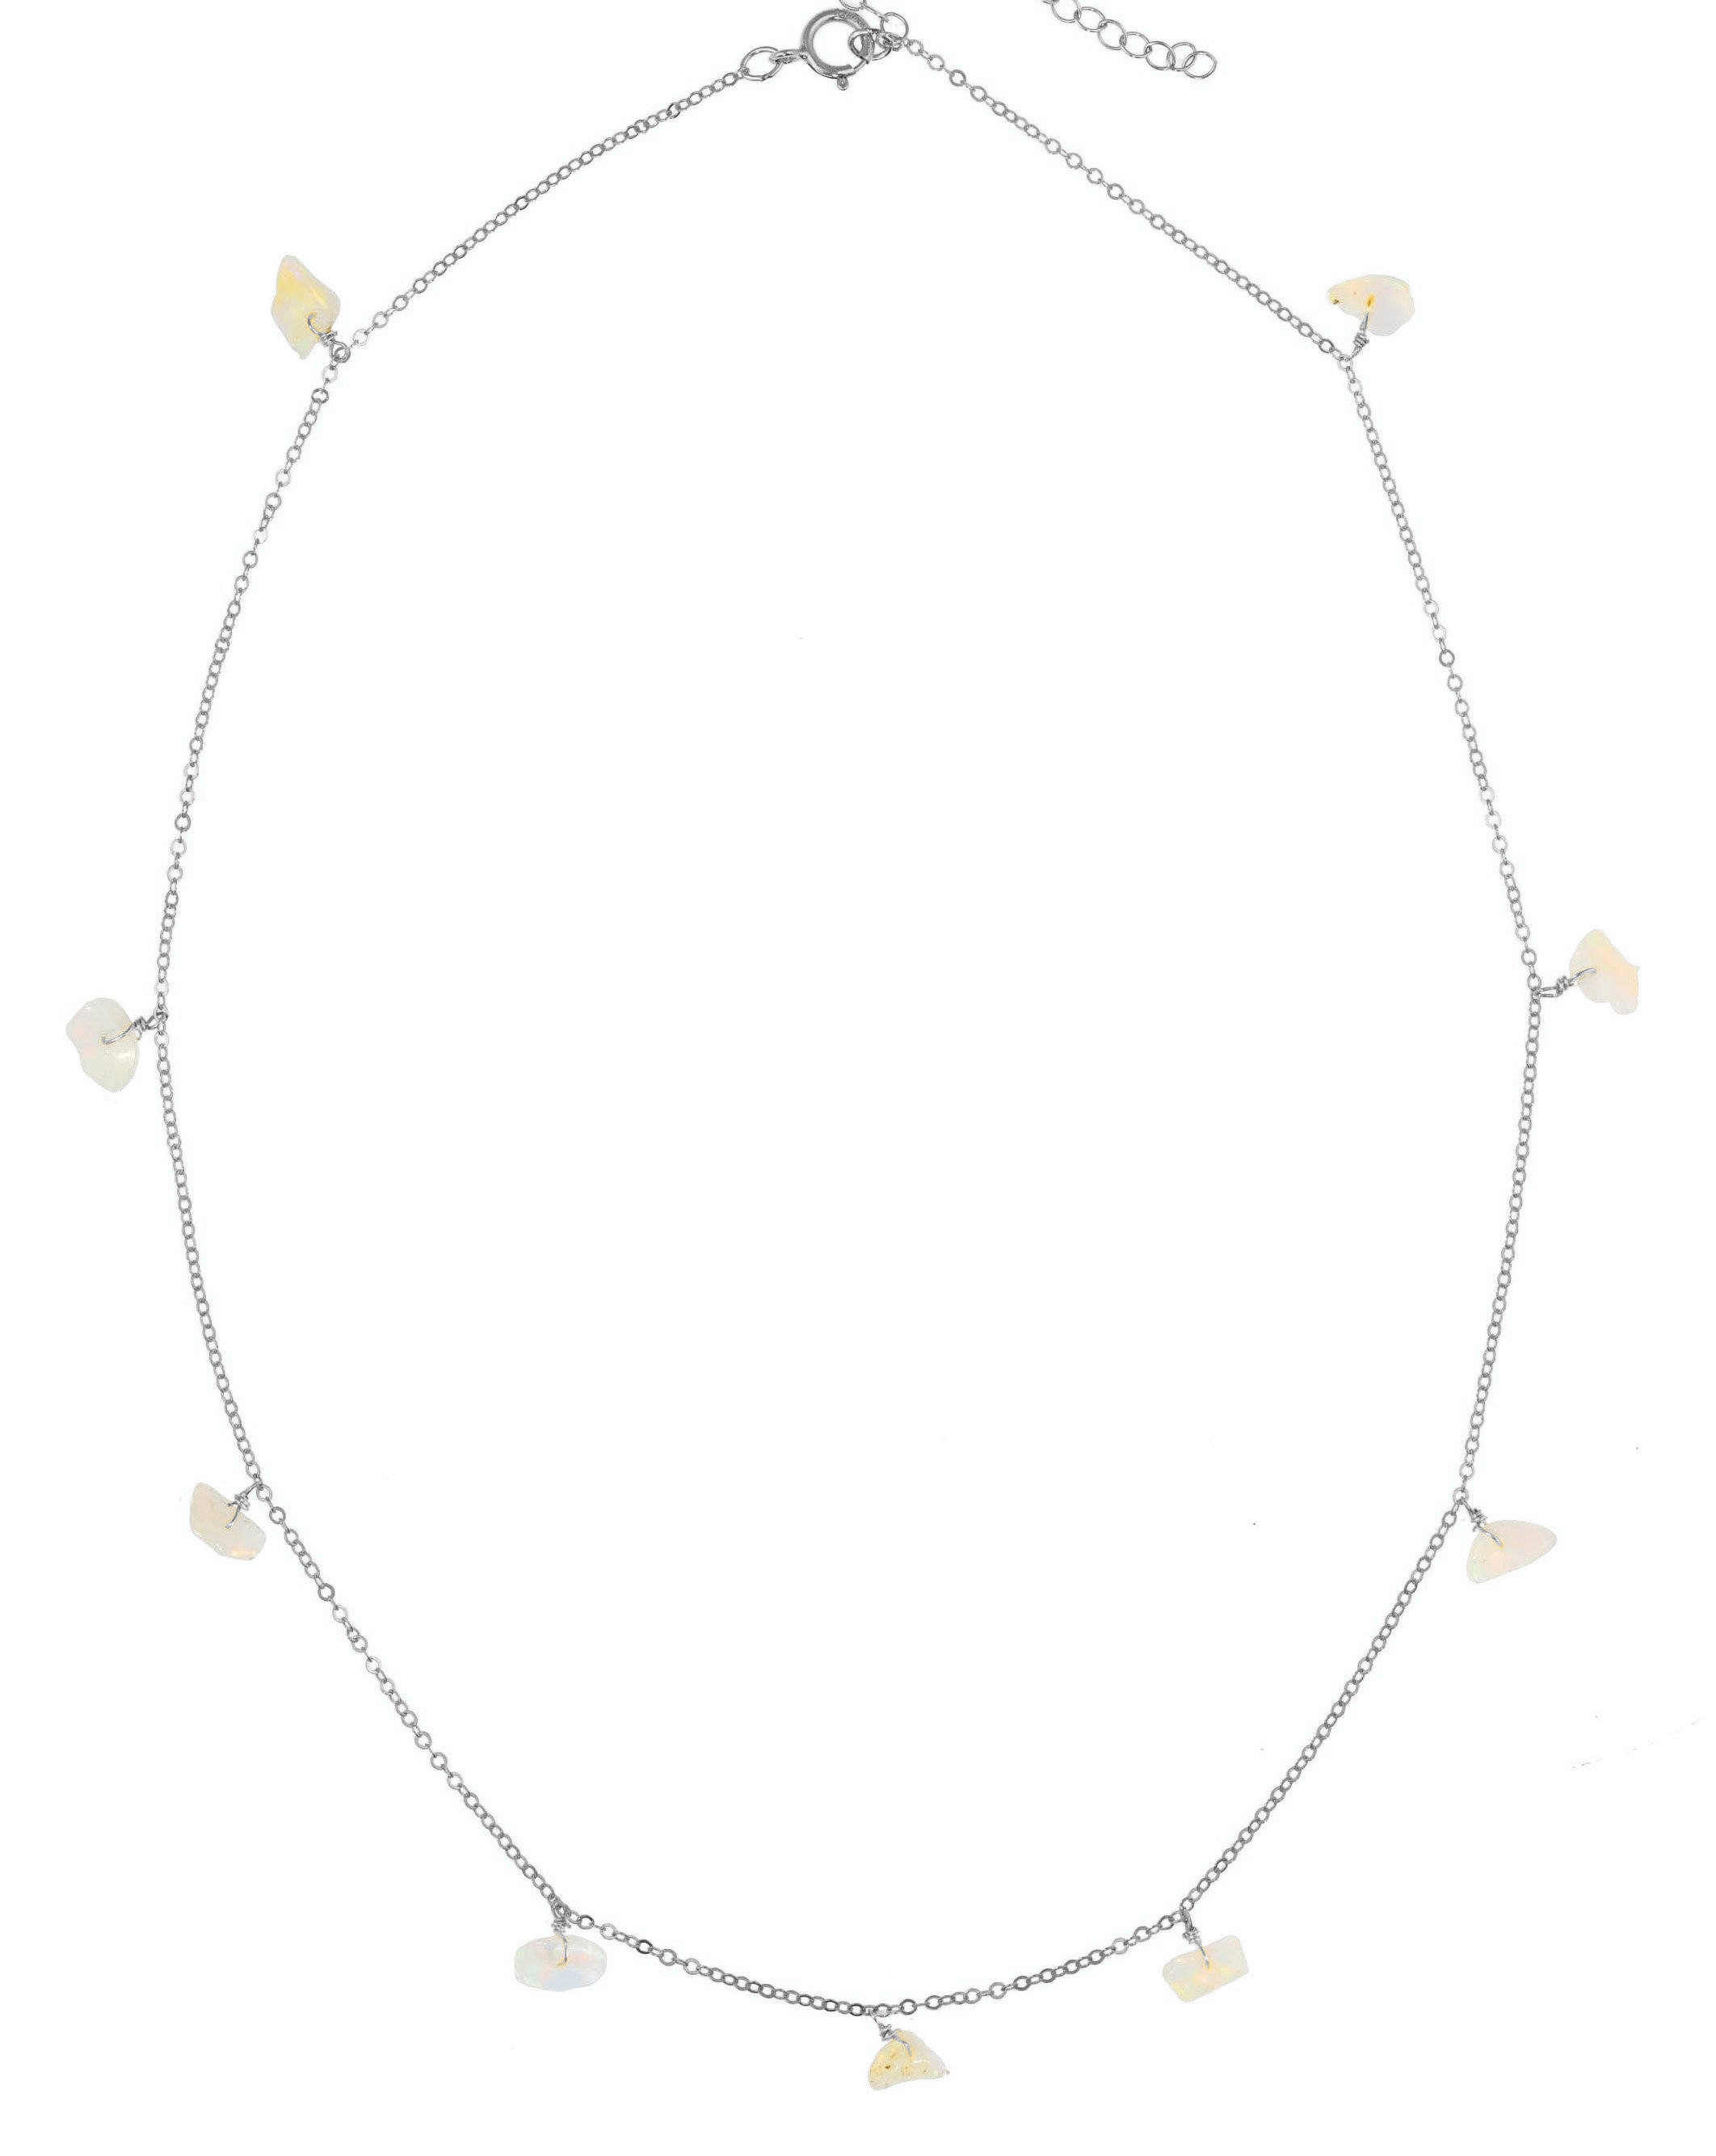 Malay Necklace by KOZAKH. A 16 to 18 inch adjustable length necklace, crafted in Sterling Silver, featuring Ethiopian Opal chips.